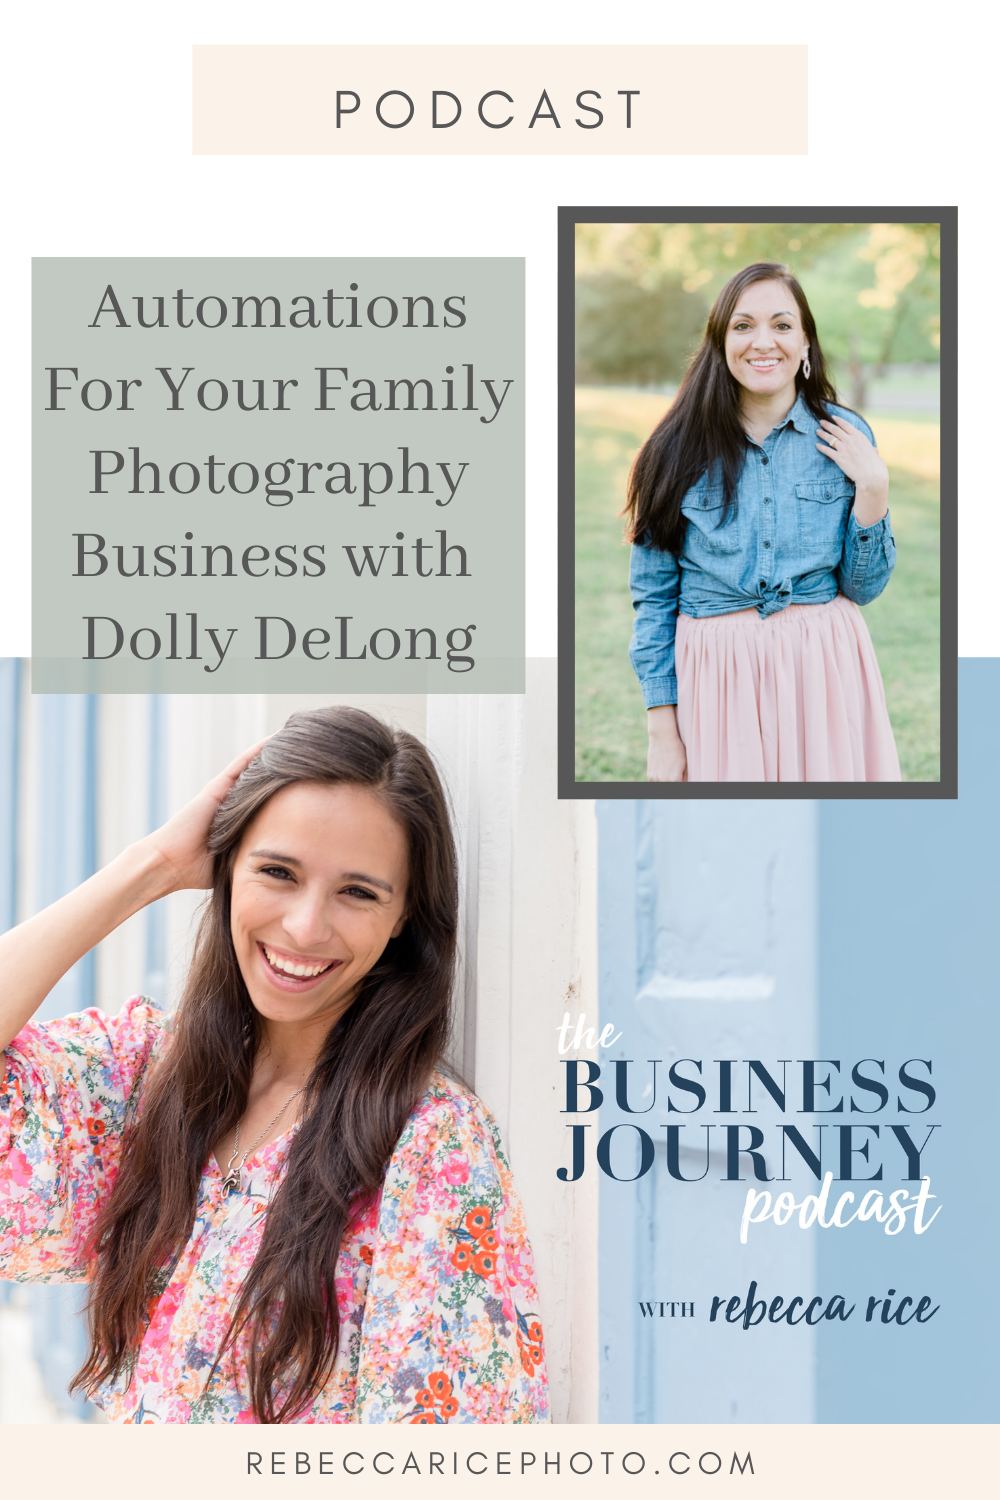 Automations for your Family Photography Business: Dolly DeLong, systems educator shares four ways to automate your photography business today